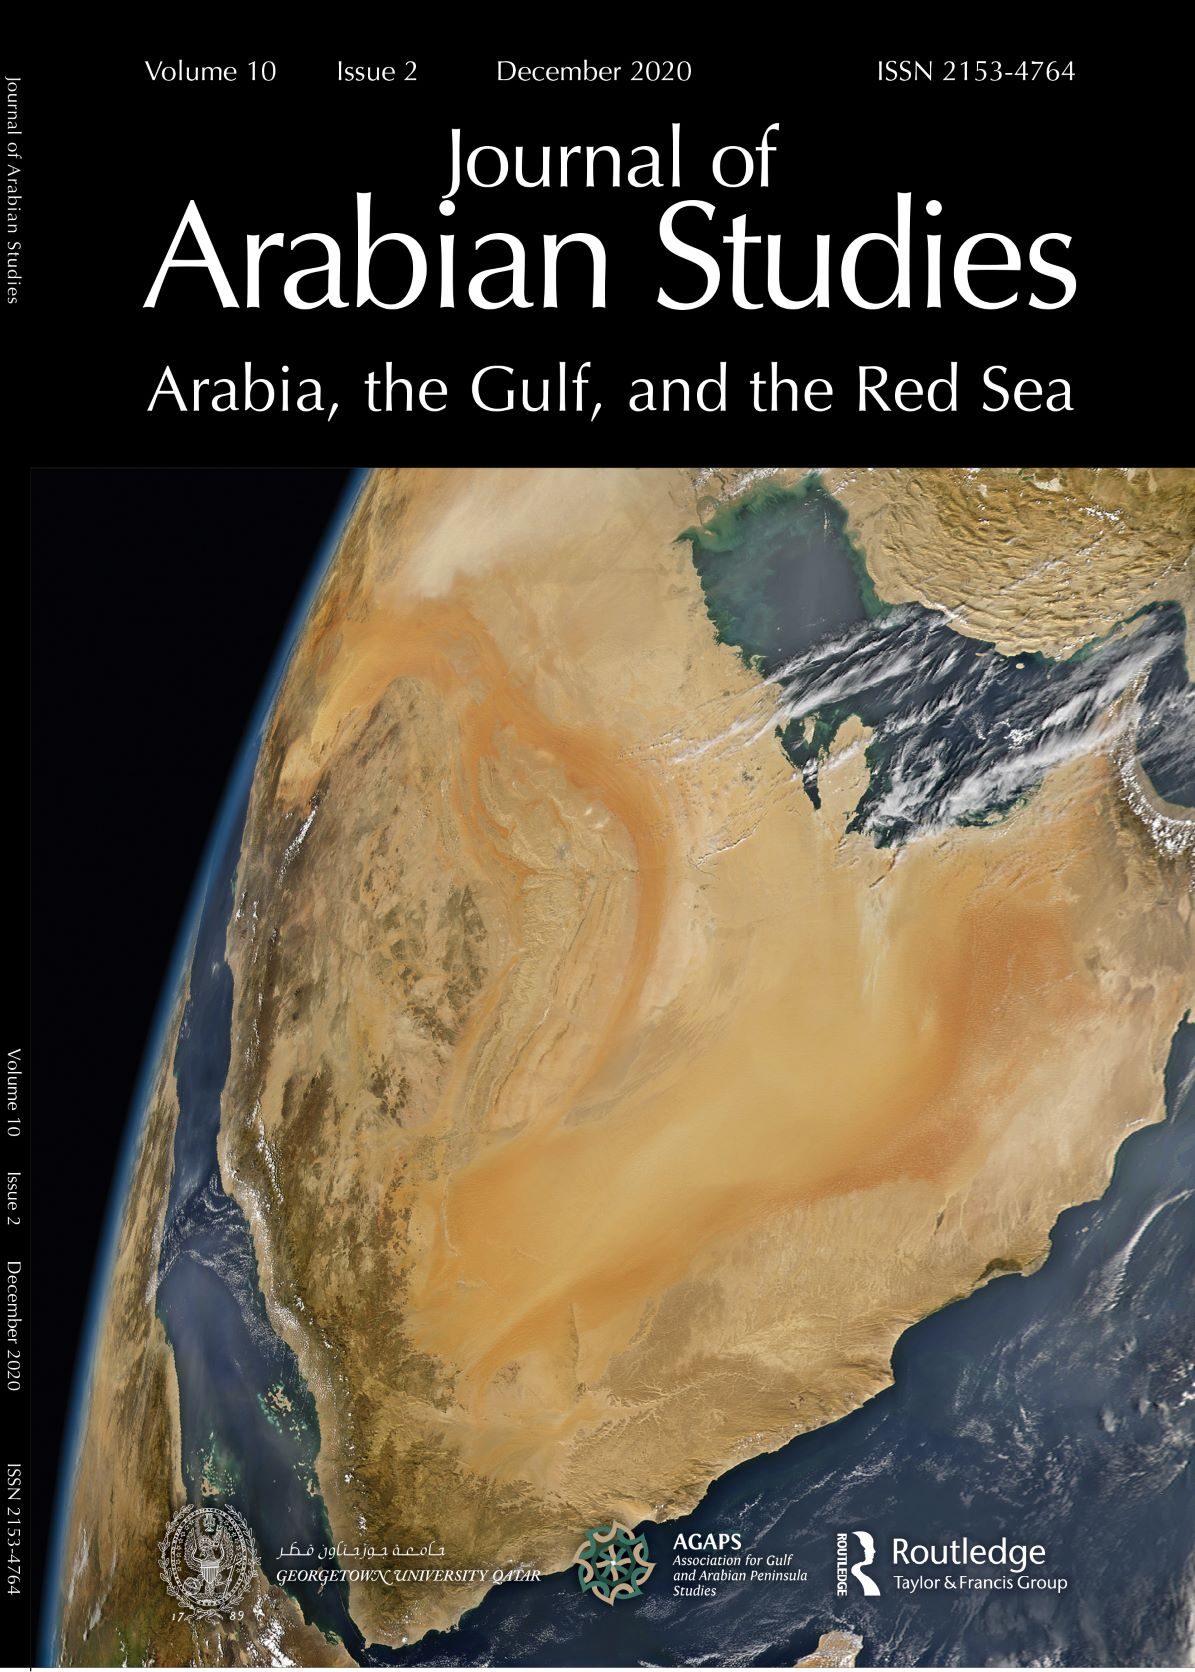 CIRS Special Issue of the Journal of Arabian Studies